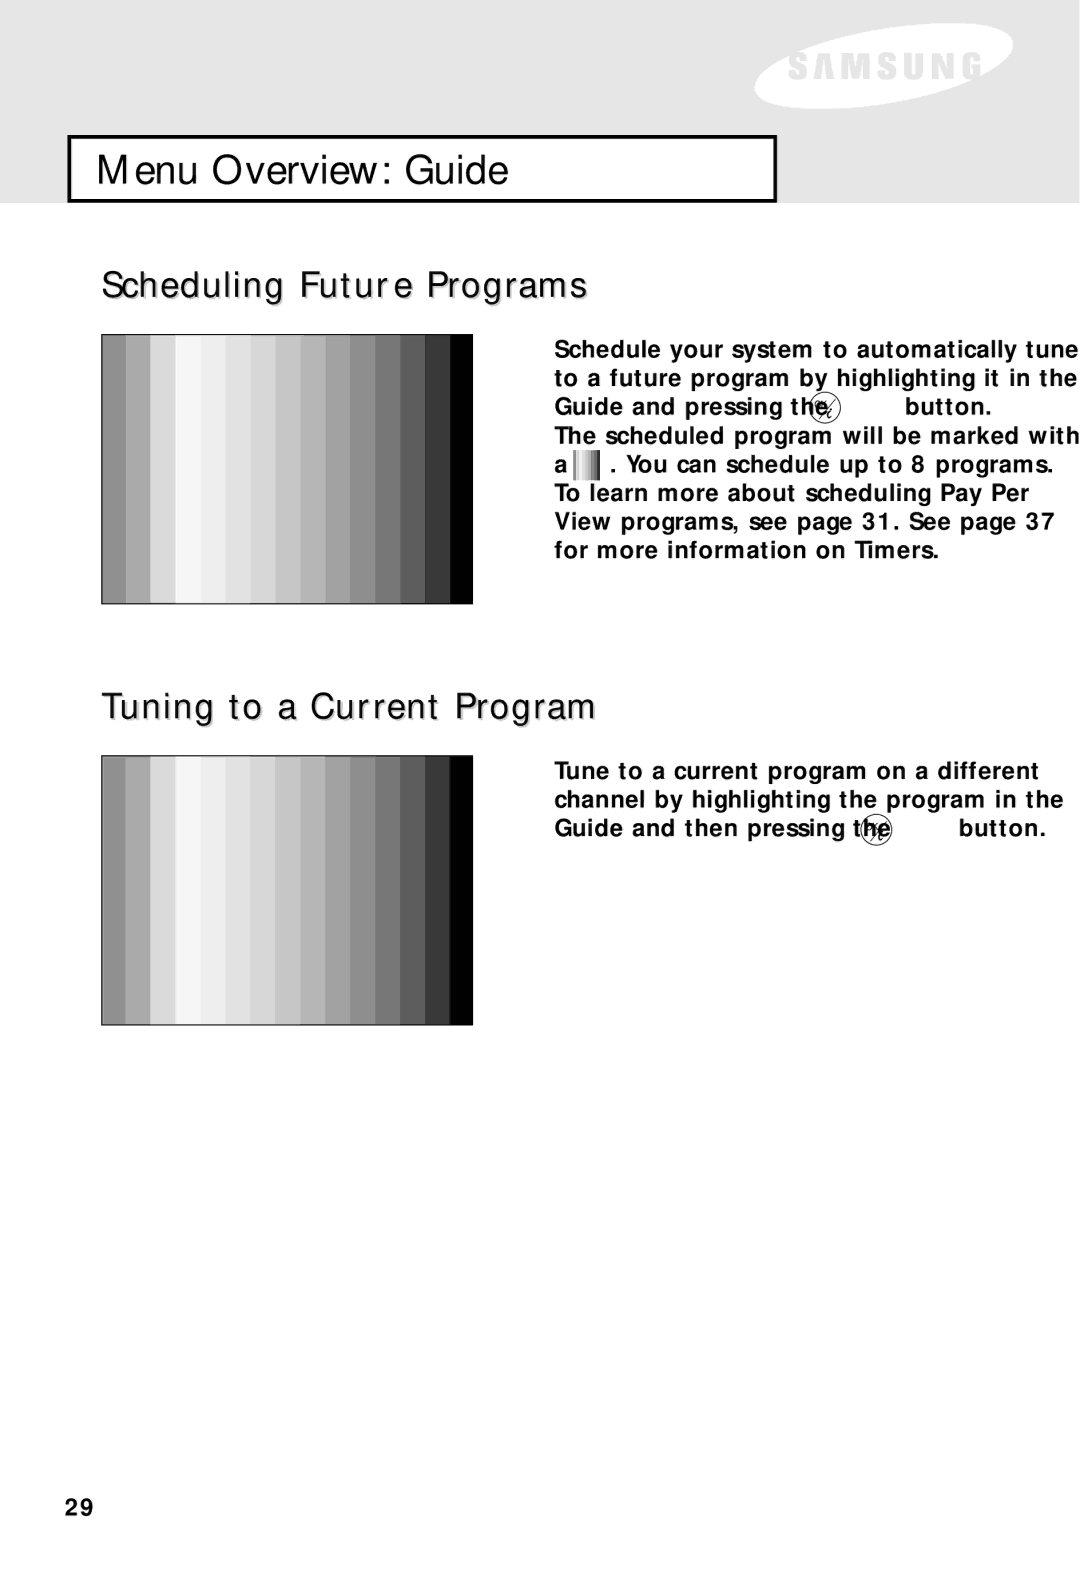 Samsung SIR-S60W owner manual Scheduling Future Programs, Tuning to a Current Program 